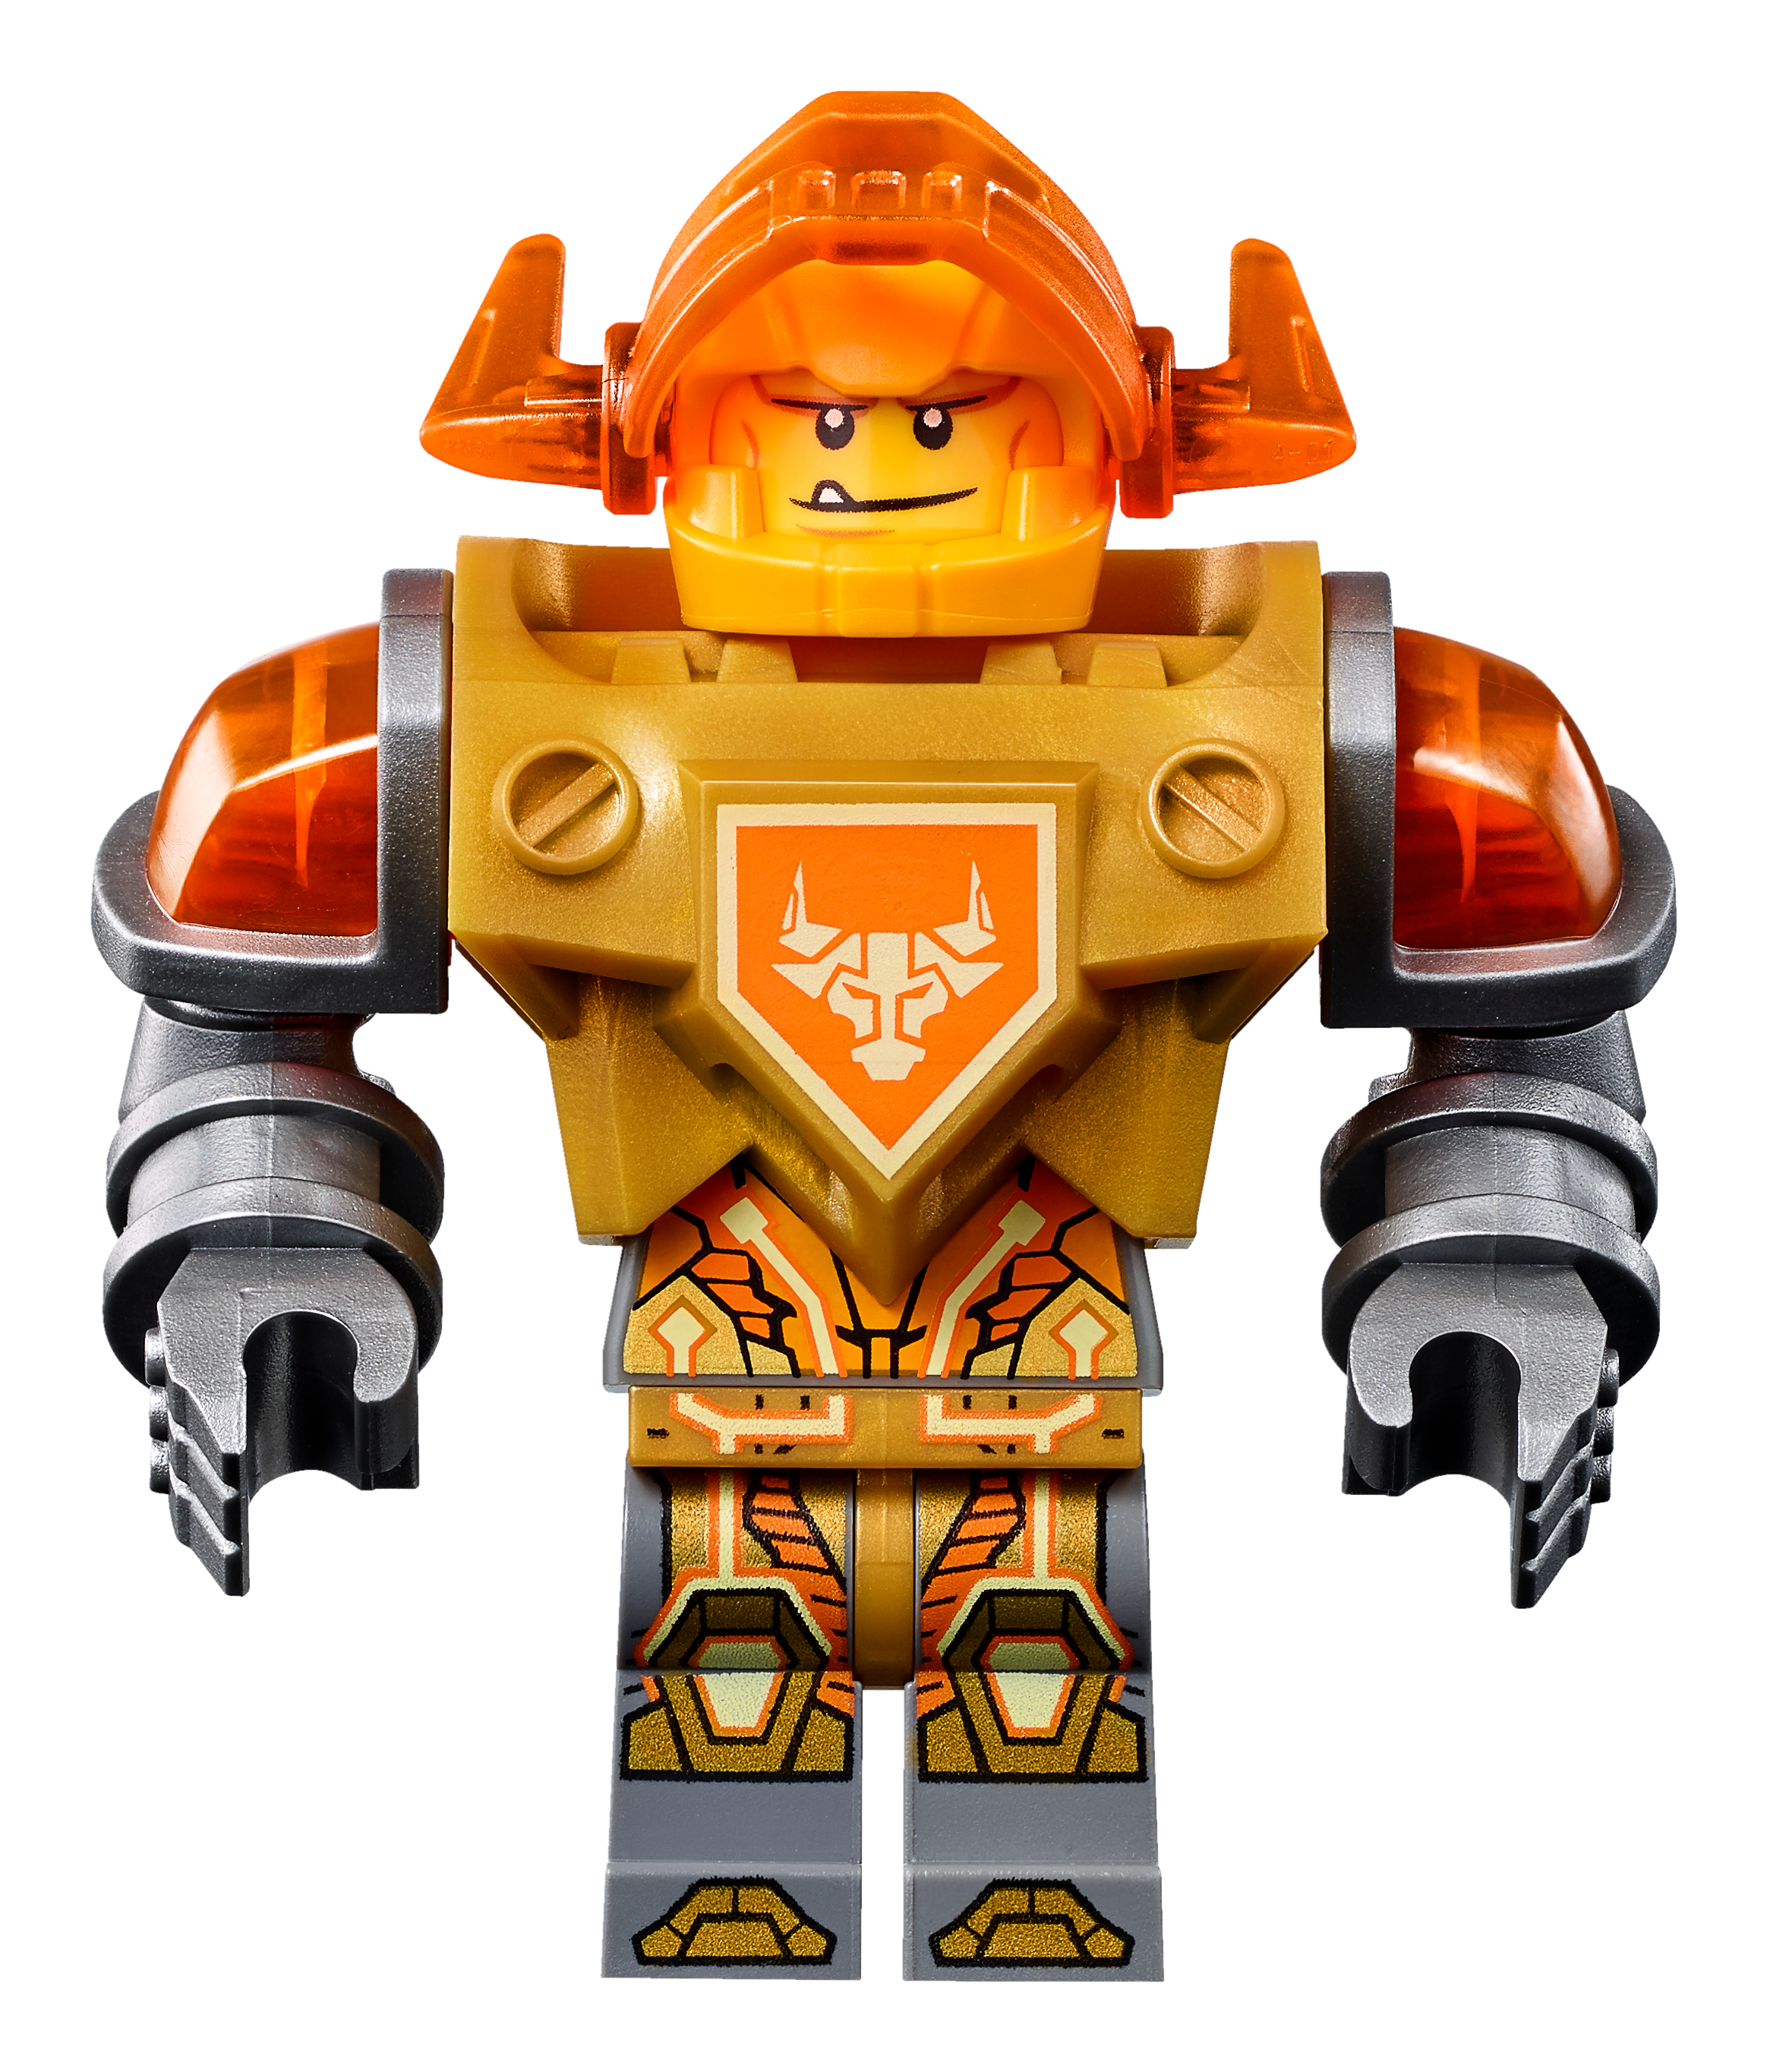 Axl - LEGO® NEXO KNIGHTS - Characters and Minifigures - LEGO.com US